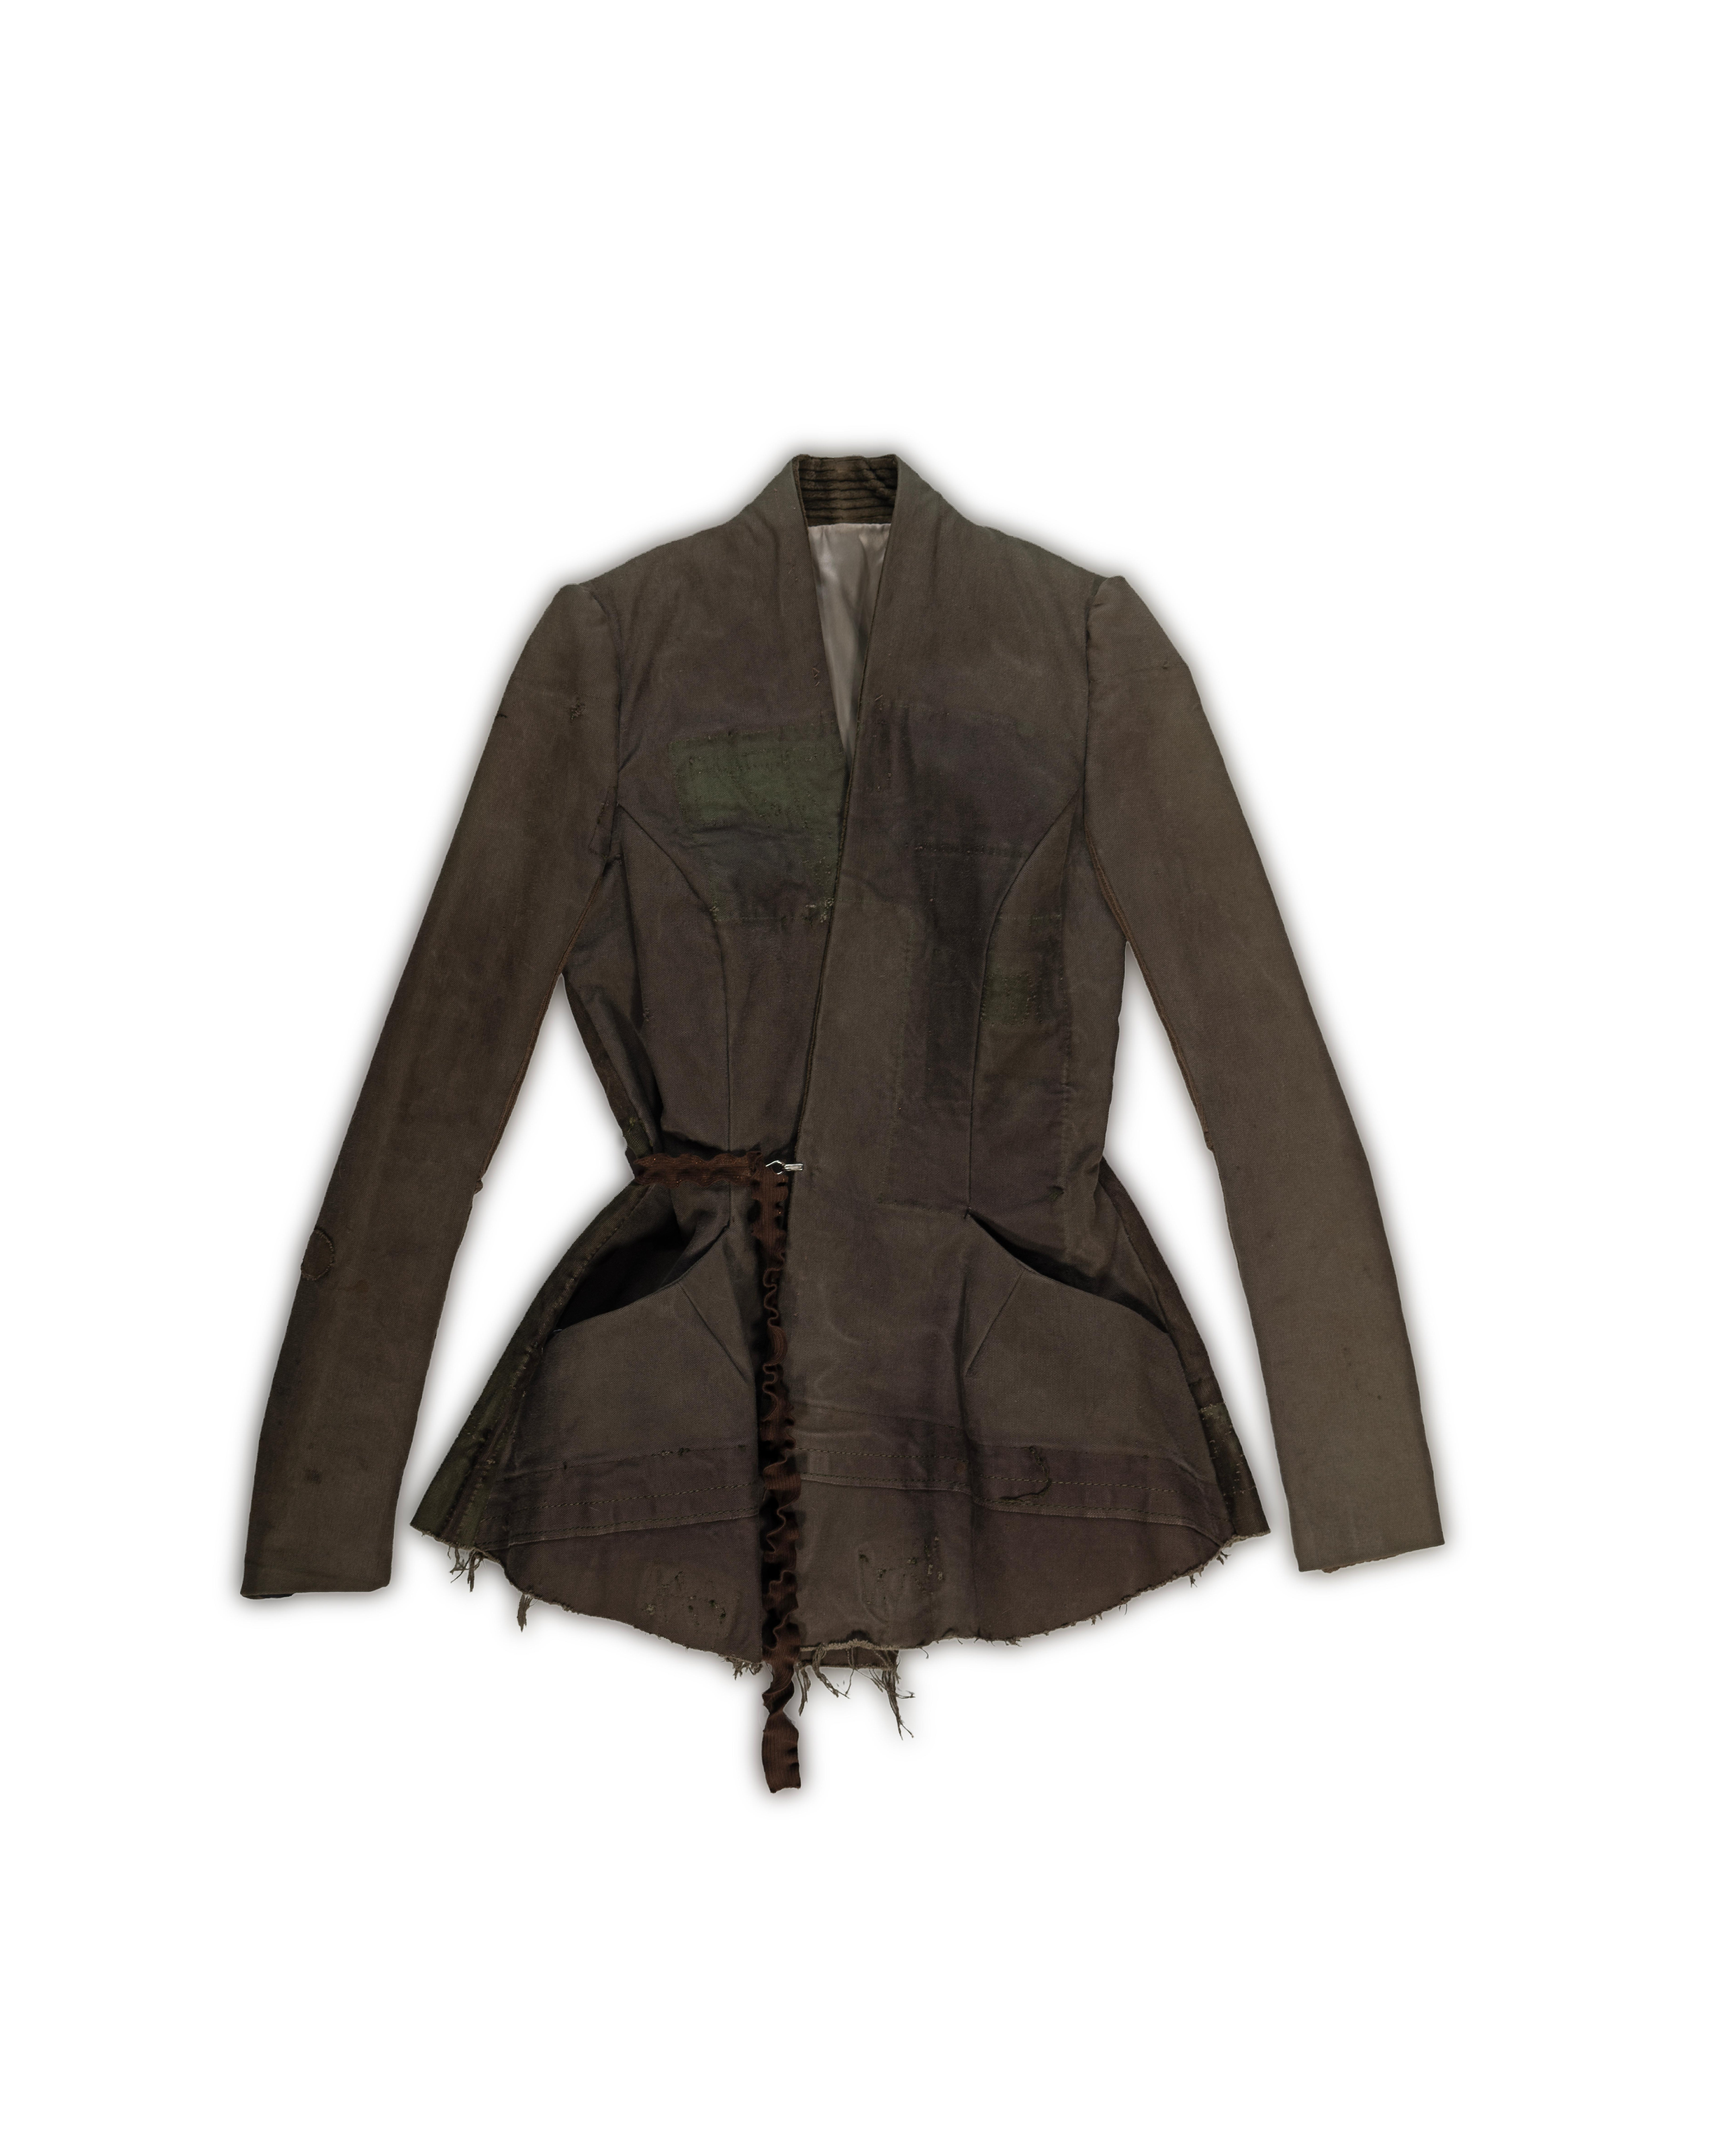 ▪ Archival Rick Owens 'Las Palmas' Jacket 
▪ c. 1998 
▪ Sold by One of a Kind Archive
▪ Museum Grade
▪ Crafted from multiple deconstructed military surplus bags
▪ Princess seam bodice with straight front edges and a stand-up collar
▪ Front closure